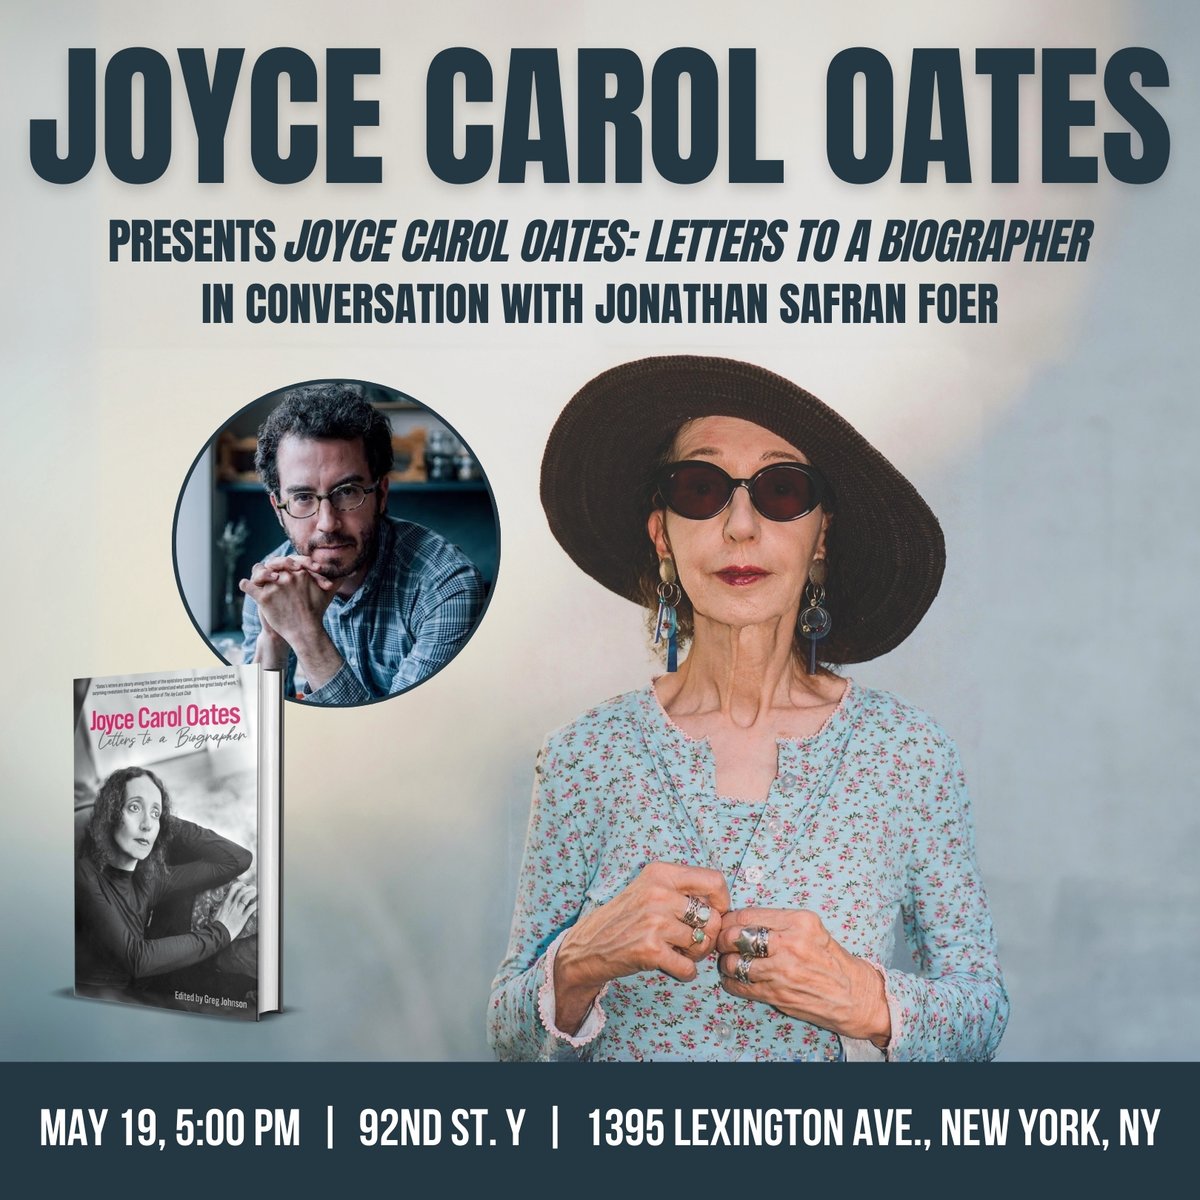 MAY 19! @JoyceCarolOates presents Letters to a Biographer at the 92nd St. Y in New York, in conversation with #JonathanSafranFoer (Here I Am, Everything is Illuminated). In-person and online tickets available: buff.ly/3xYxWqx

#joycecaroloates #bookevent #nycevents